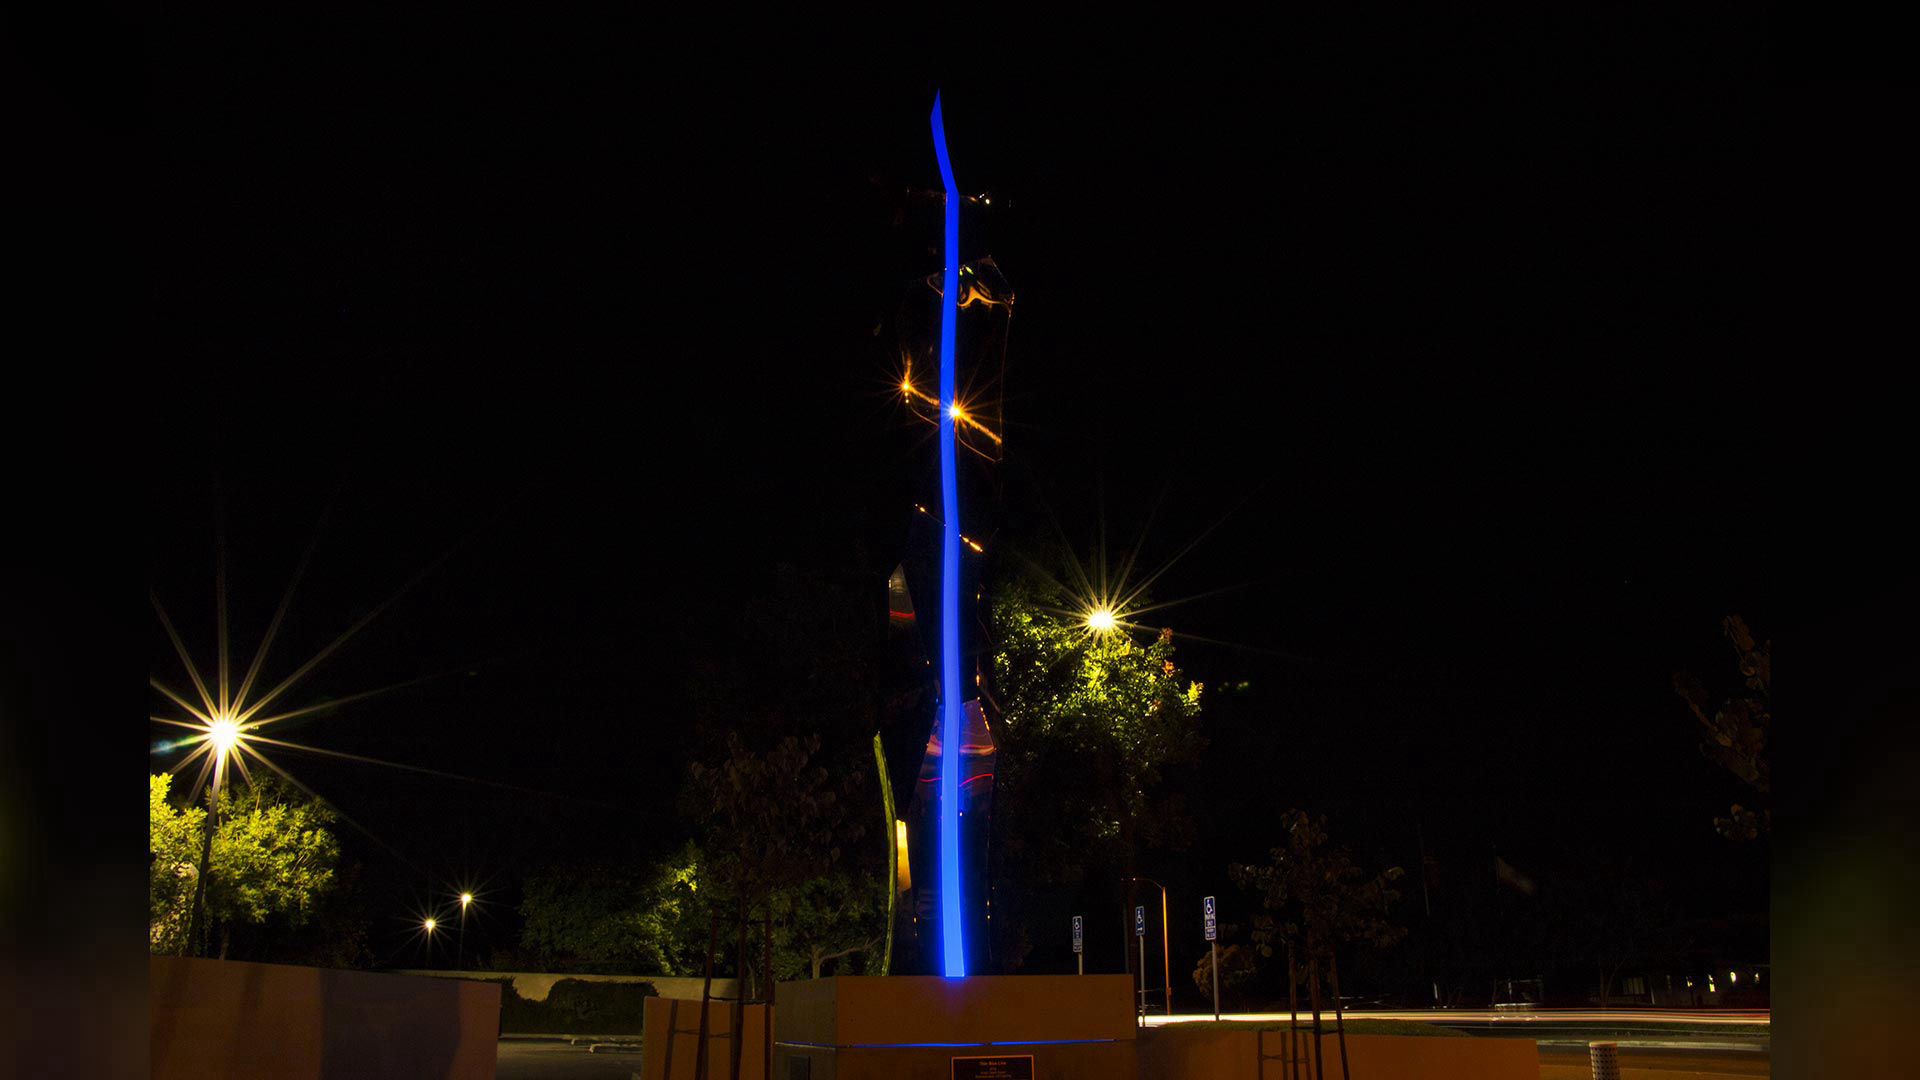 Thin Blue Line - polished stainless steel public art sculpture by Heath Satow in Moorpark, CA